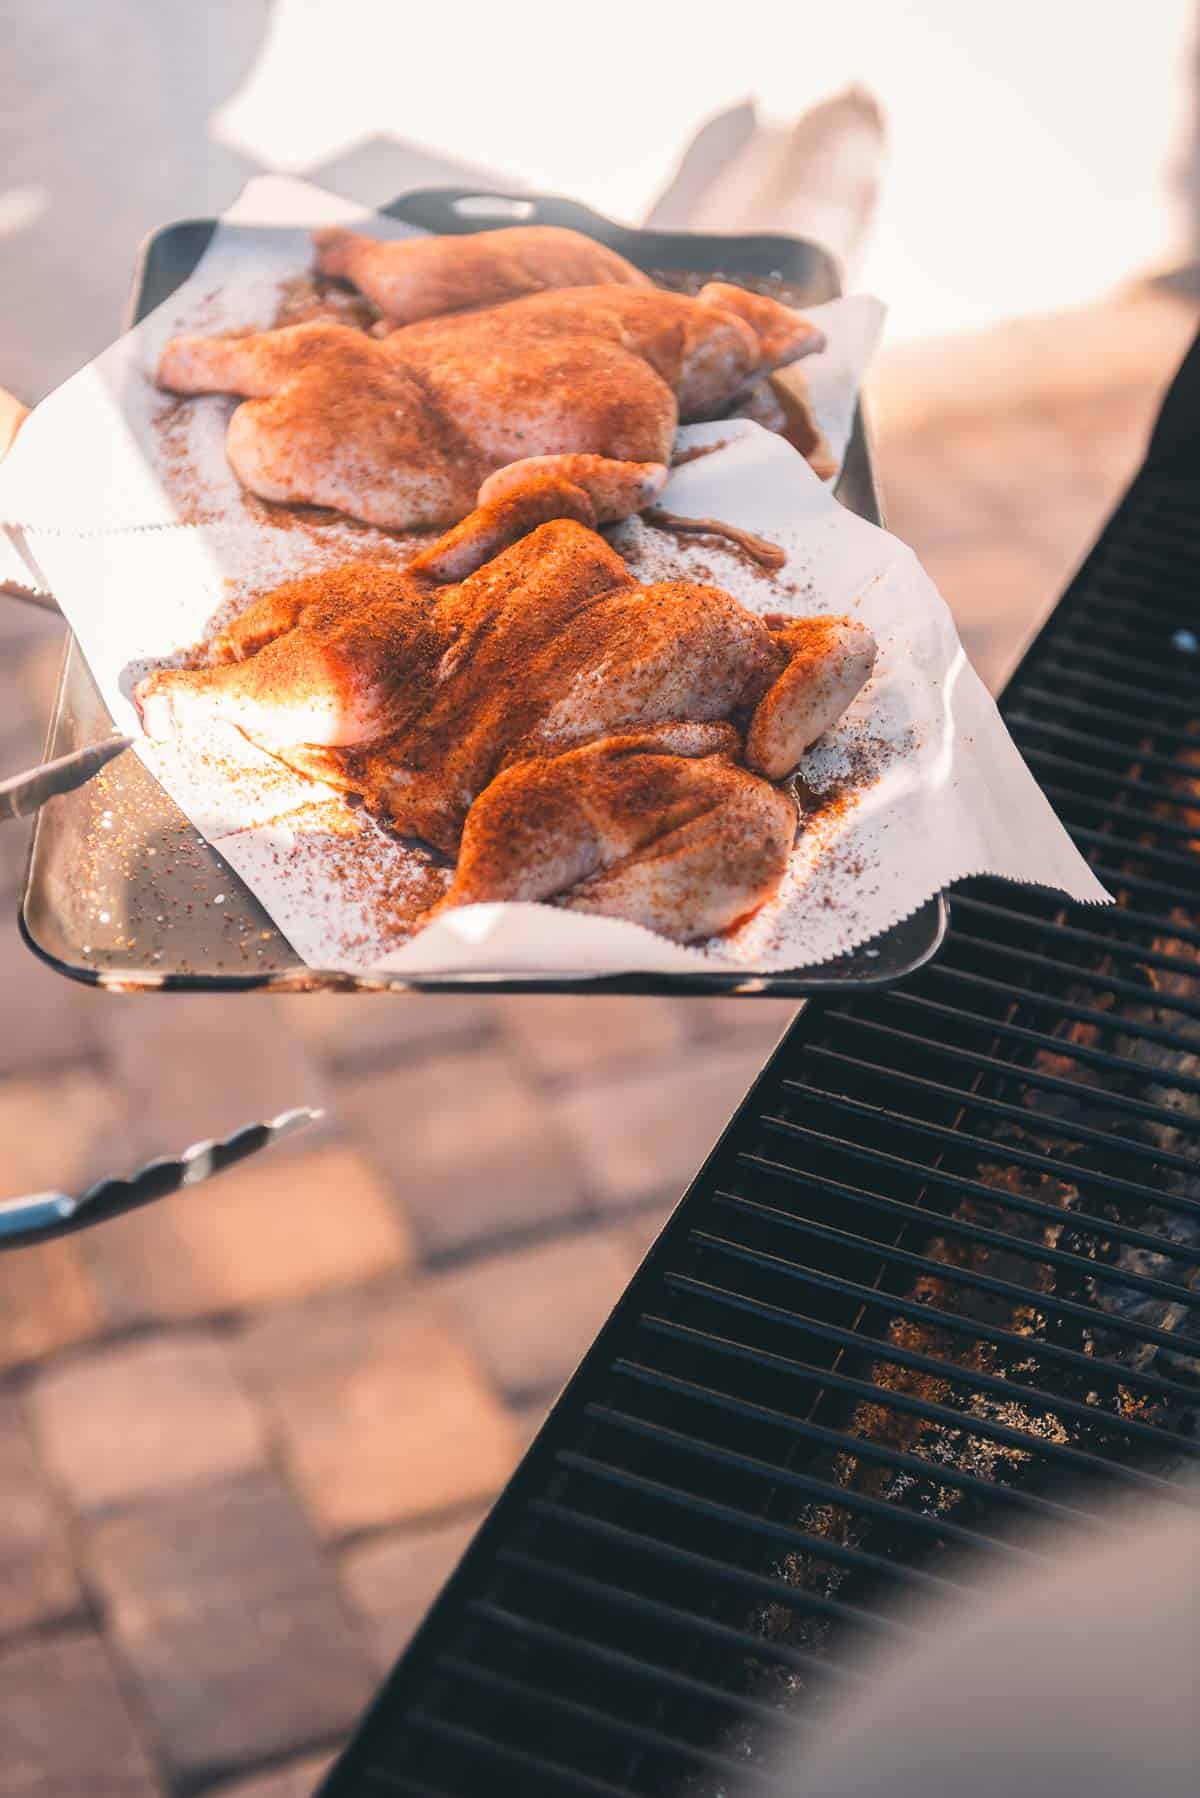 A person is holding a tray of game hens on a grill.